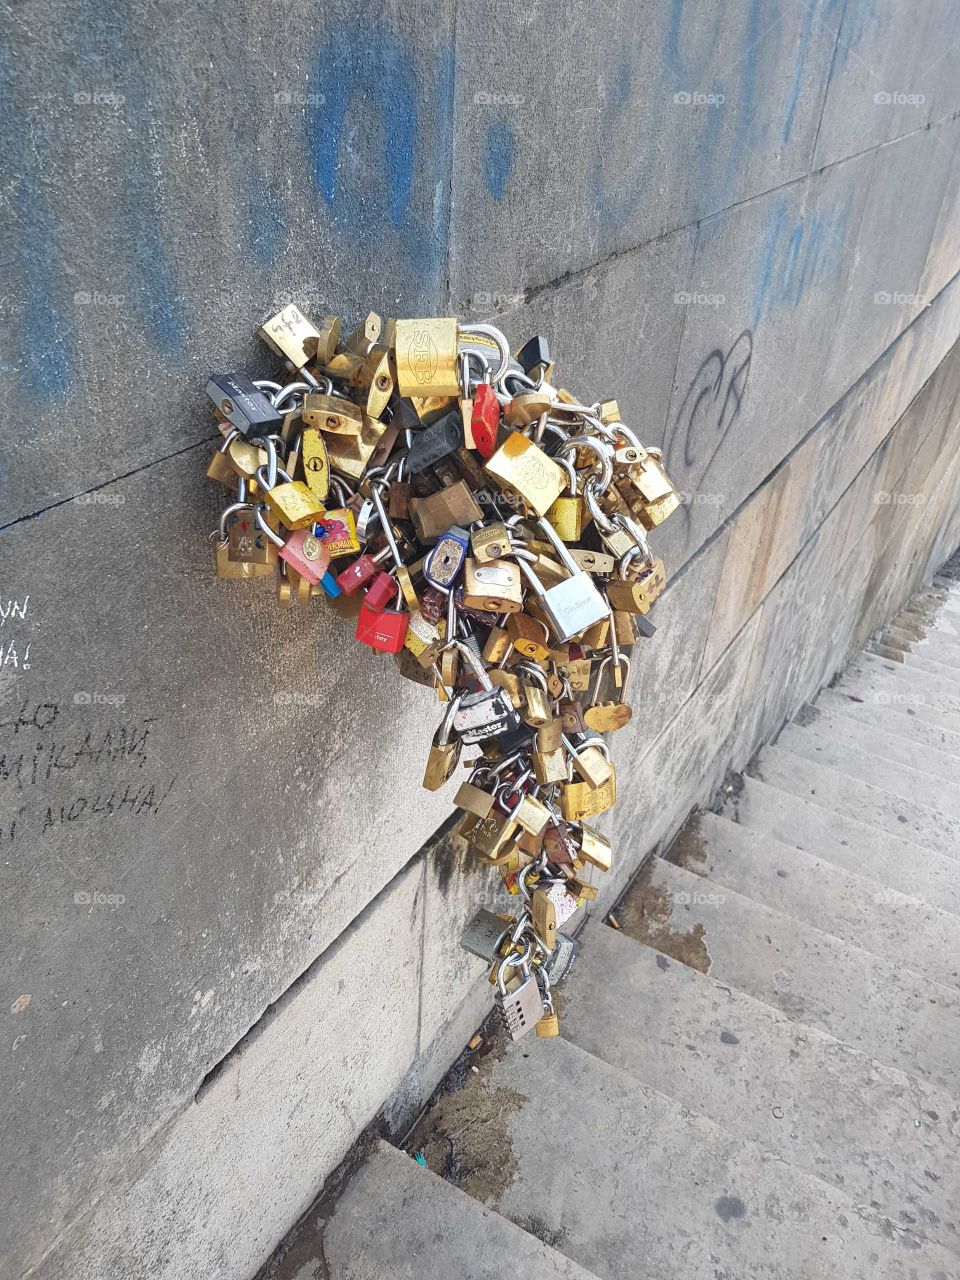 locks of love the shape reminds me of Africa